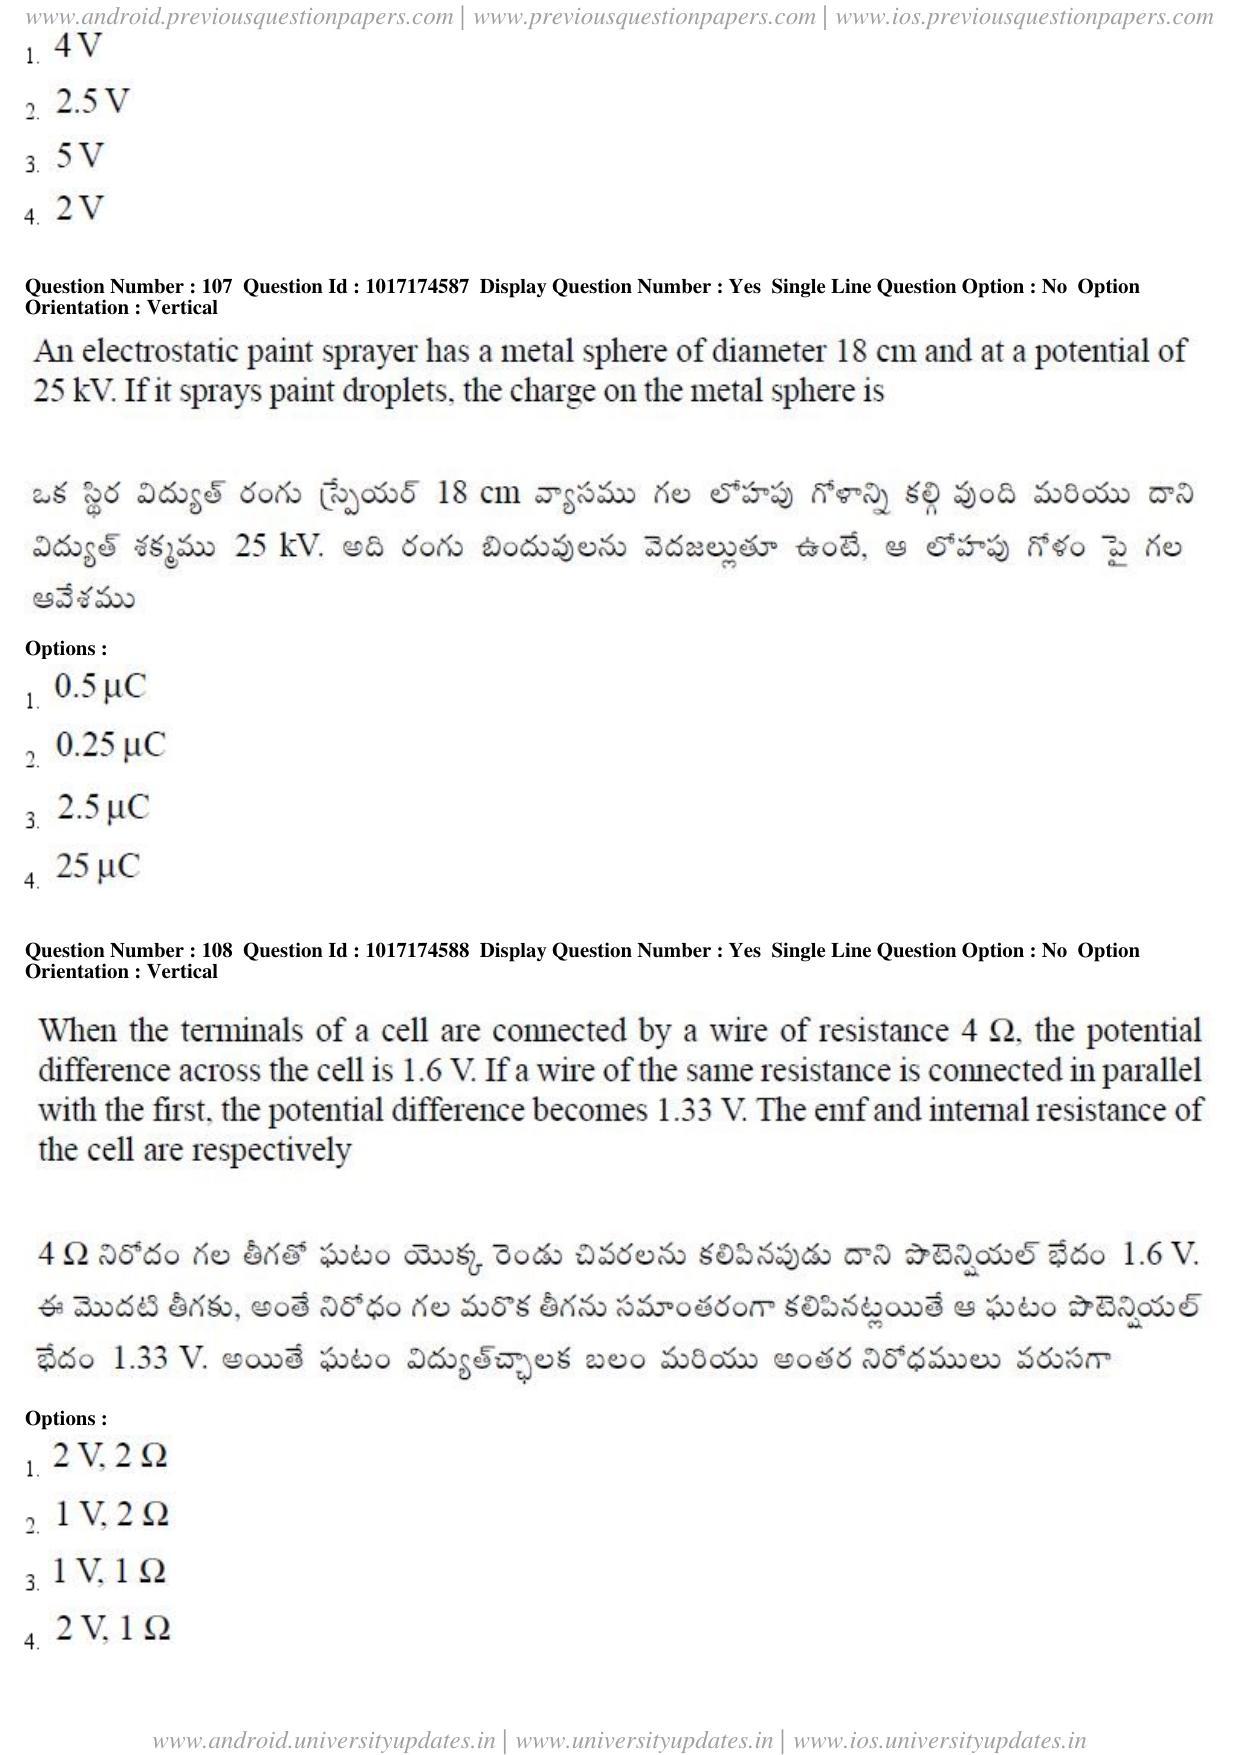 AP EAPCET 2017 - April 26, 2017 Forenoon - Master Engineering Question Paper With Preliminary Keys - Page 53